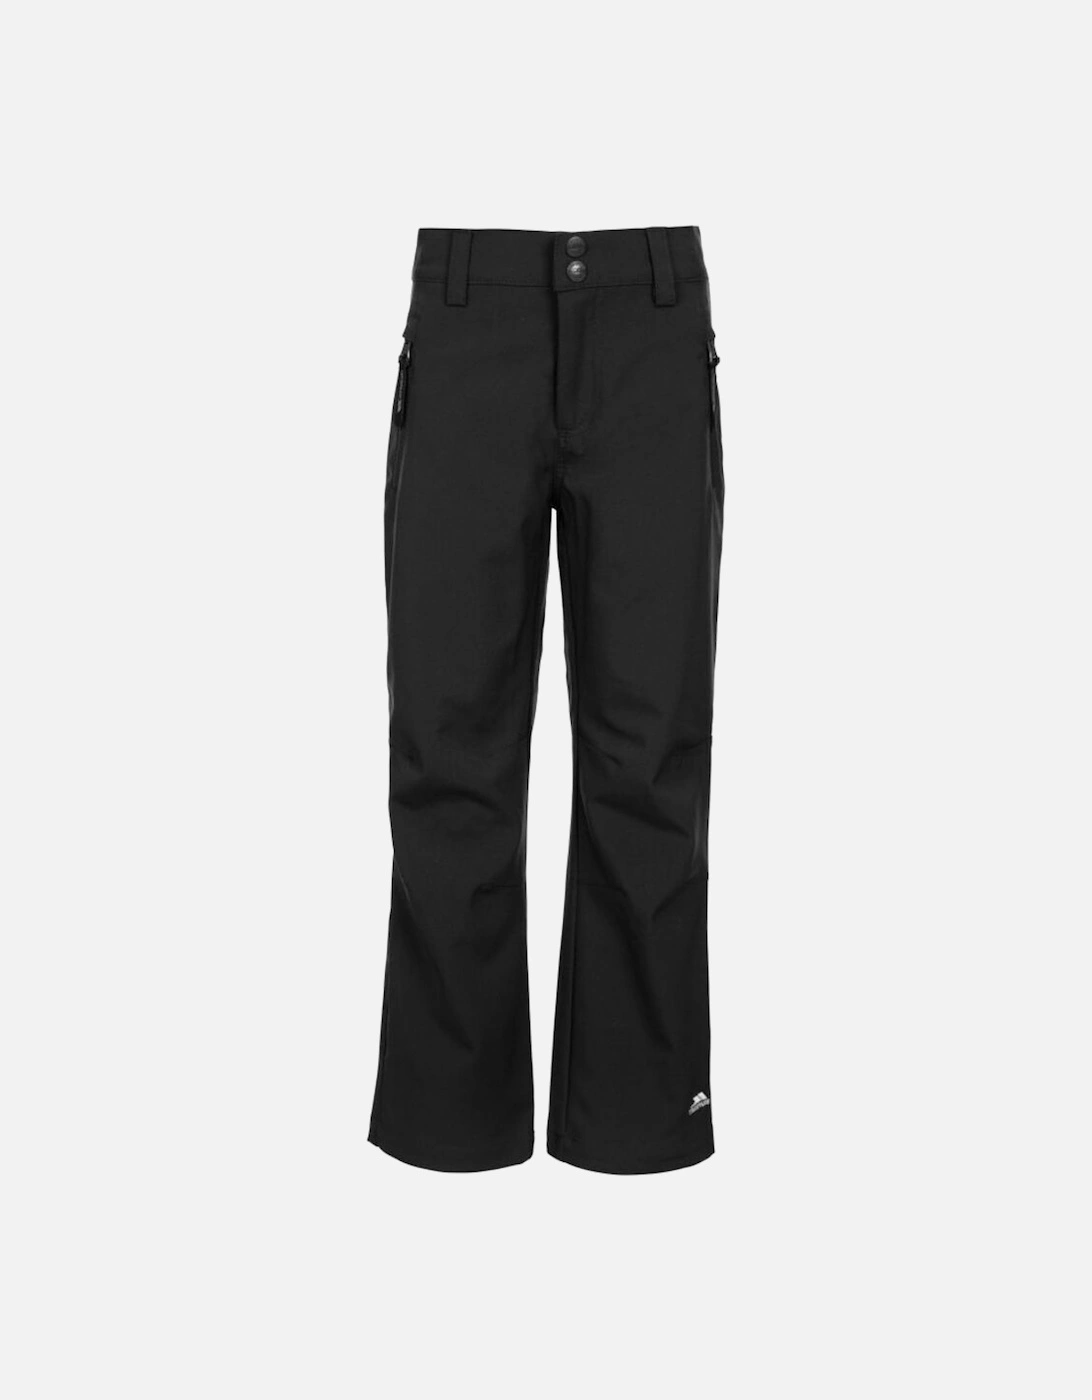 Childrens/Kids Aspiration Softshell Trousers, 5 of 4